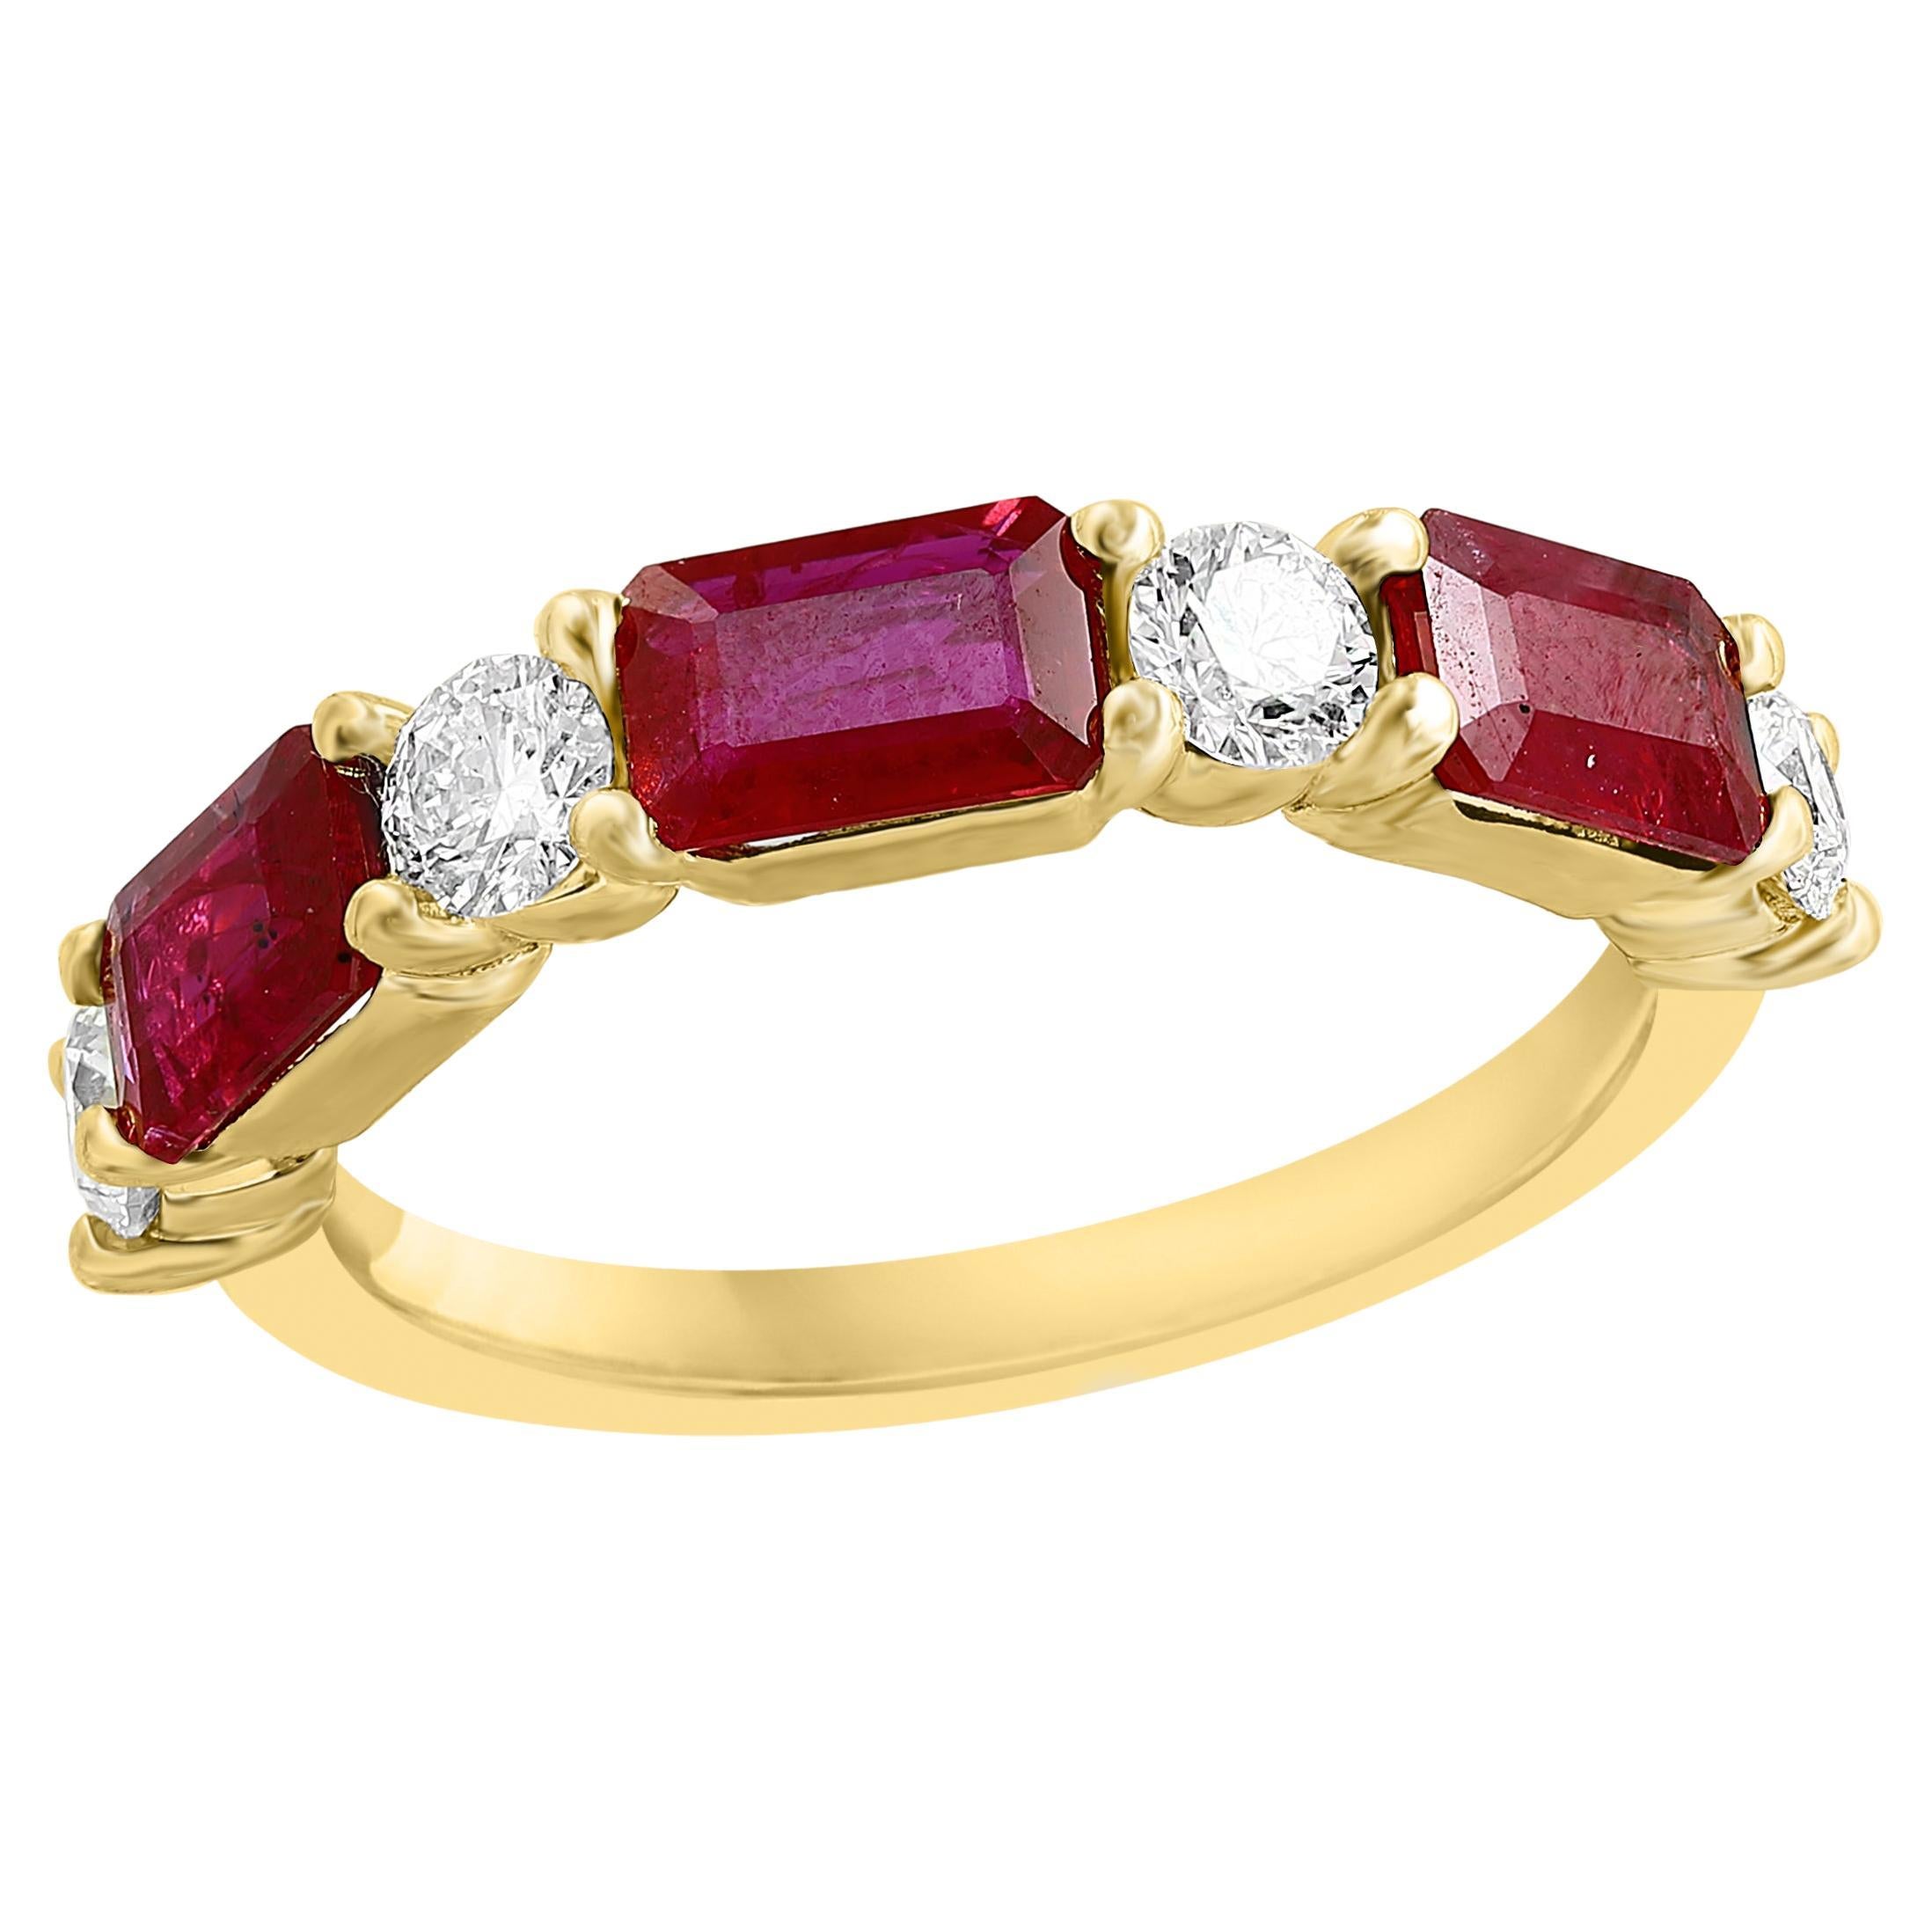 1.77 Carat Emerald Cut Ruby and Diamond Band in 14K Yellow Gold